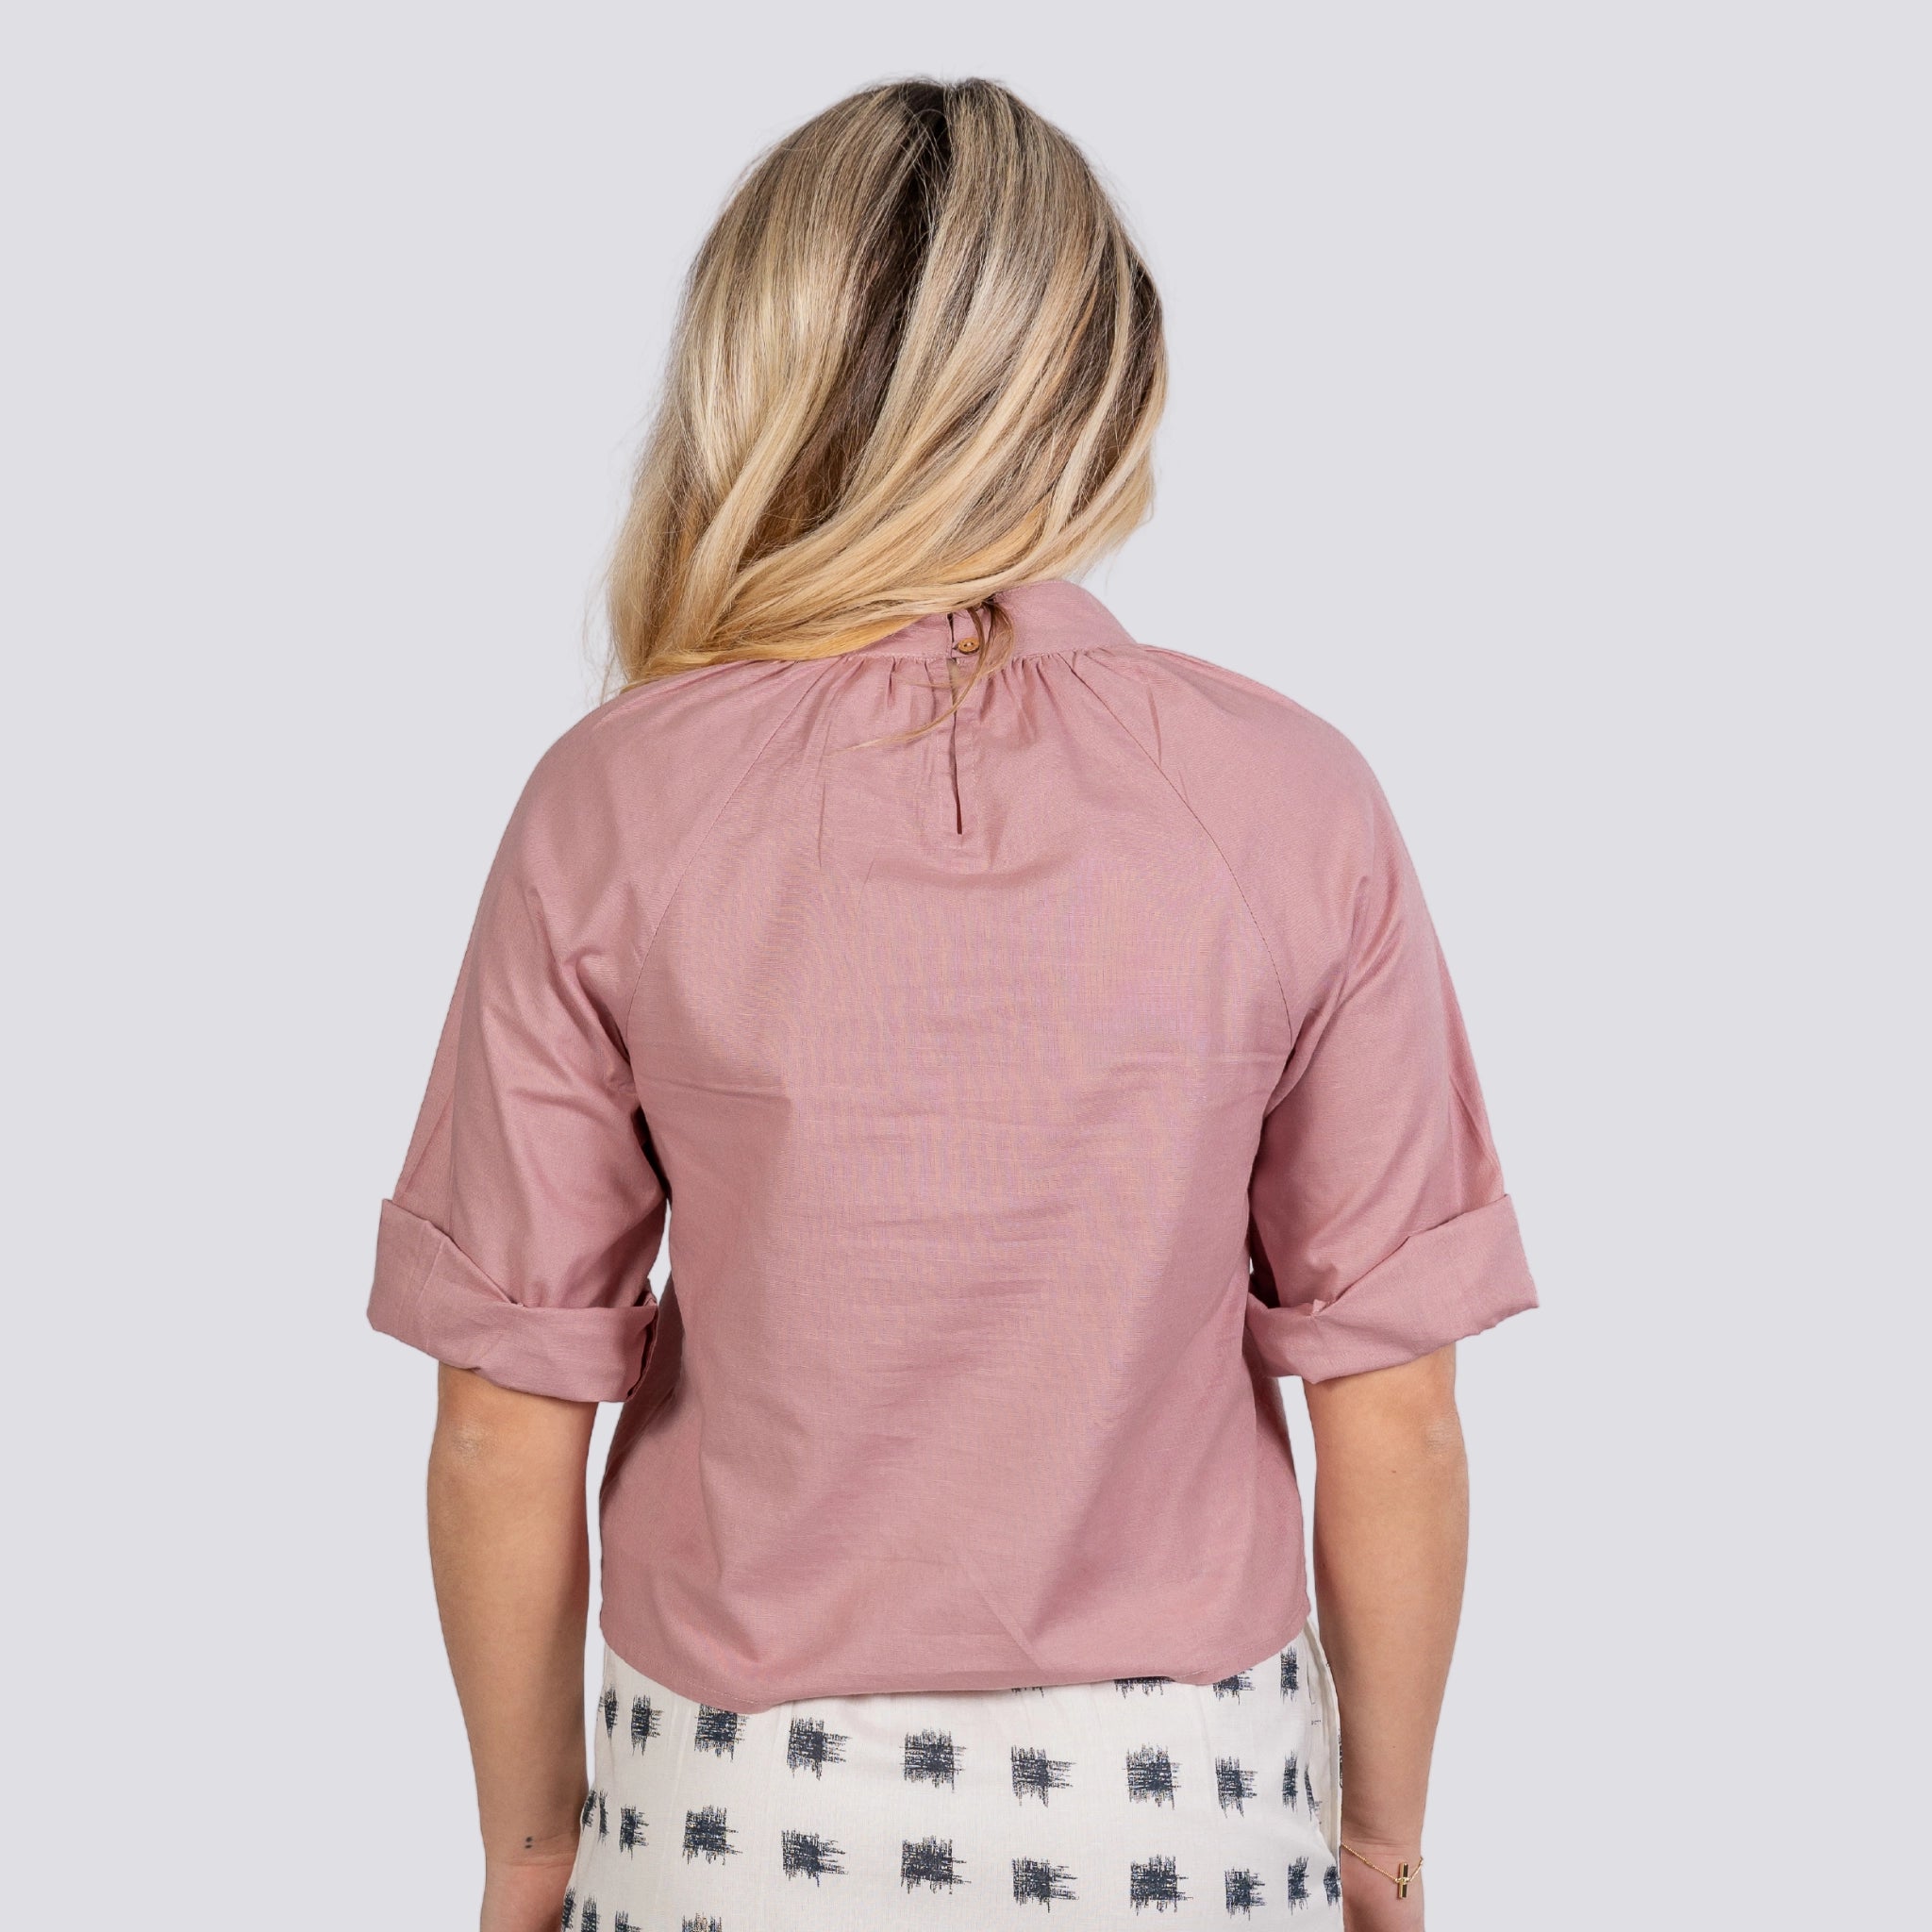 Rear view of a woman wearing a Karee Flamingo Rose 3/4 Sleeve Linen-Cotton Top with a buttoned keyhole closure. She has blonde hair and stands against a grey background.